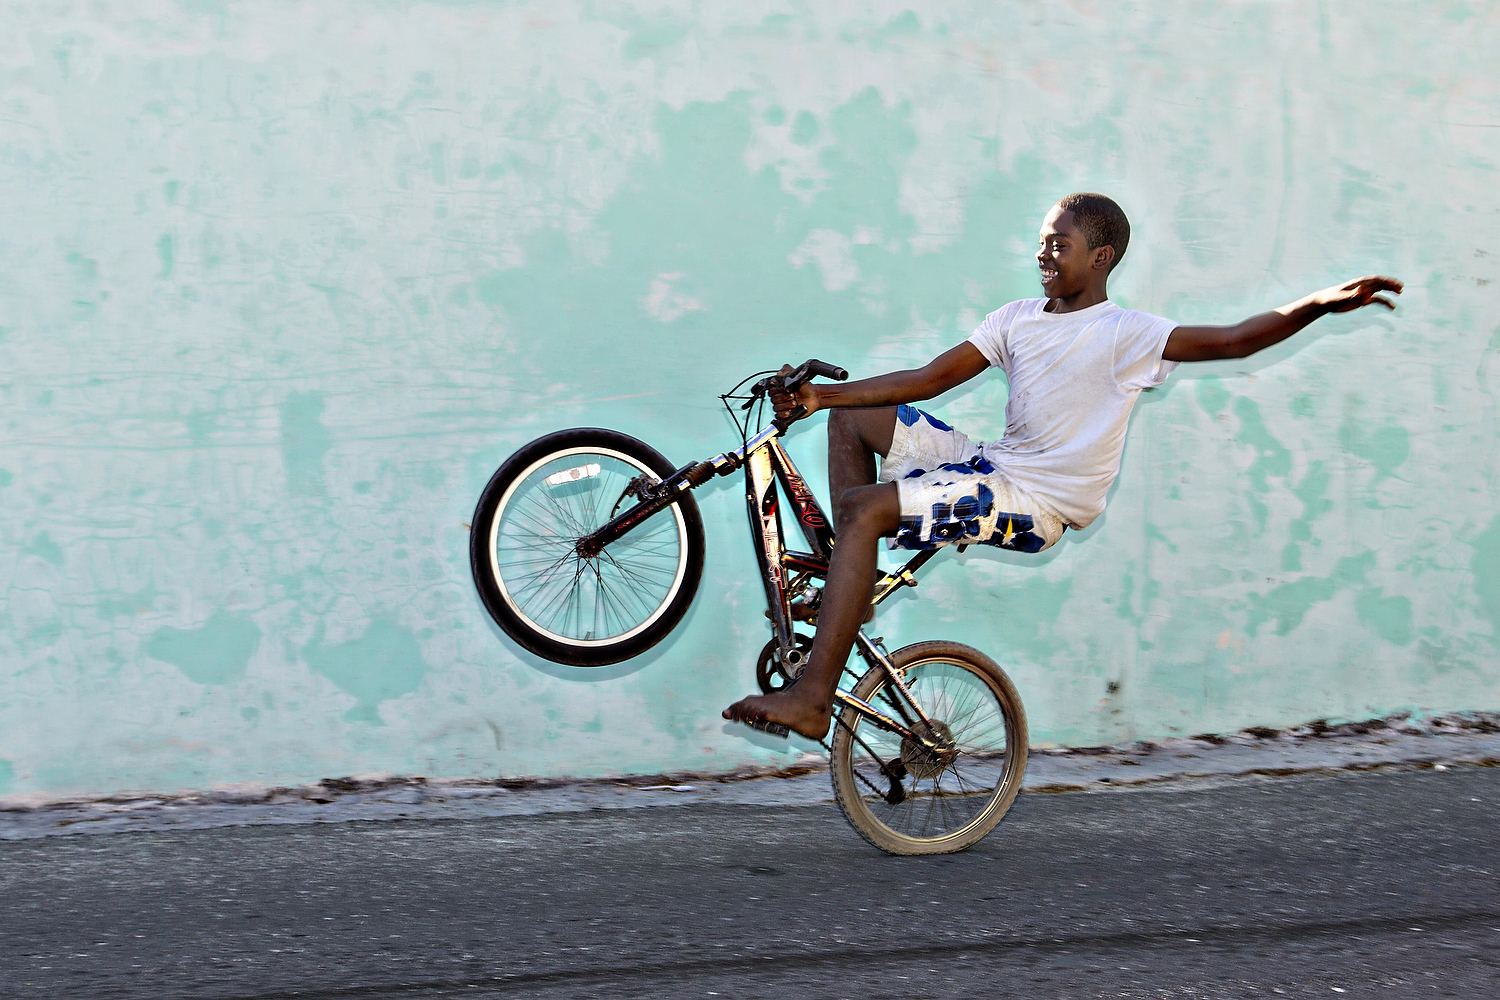  Bahamian boy rides his bicycle in Dunmore Town, Harbour Island, The Bahamas 